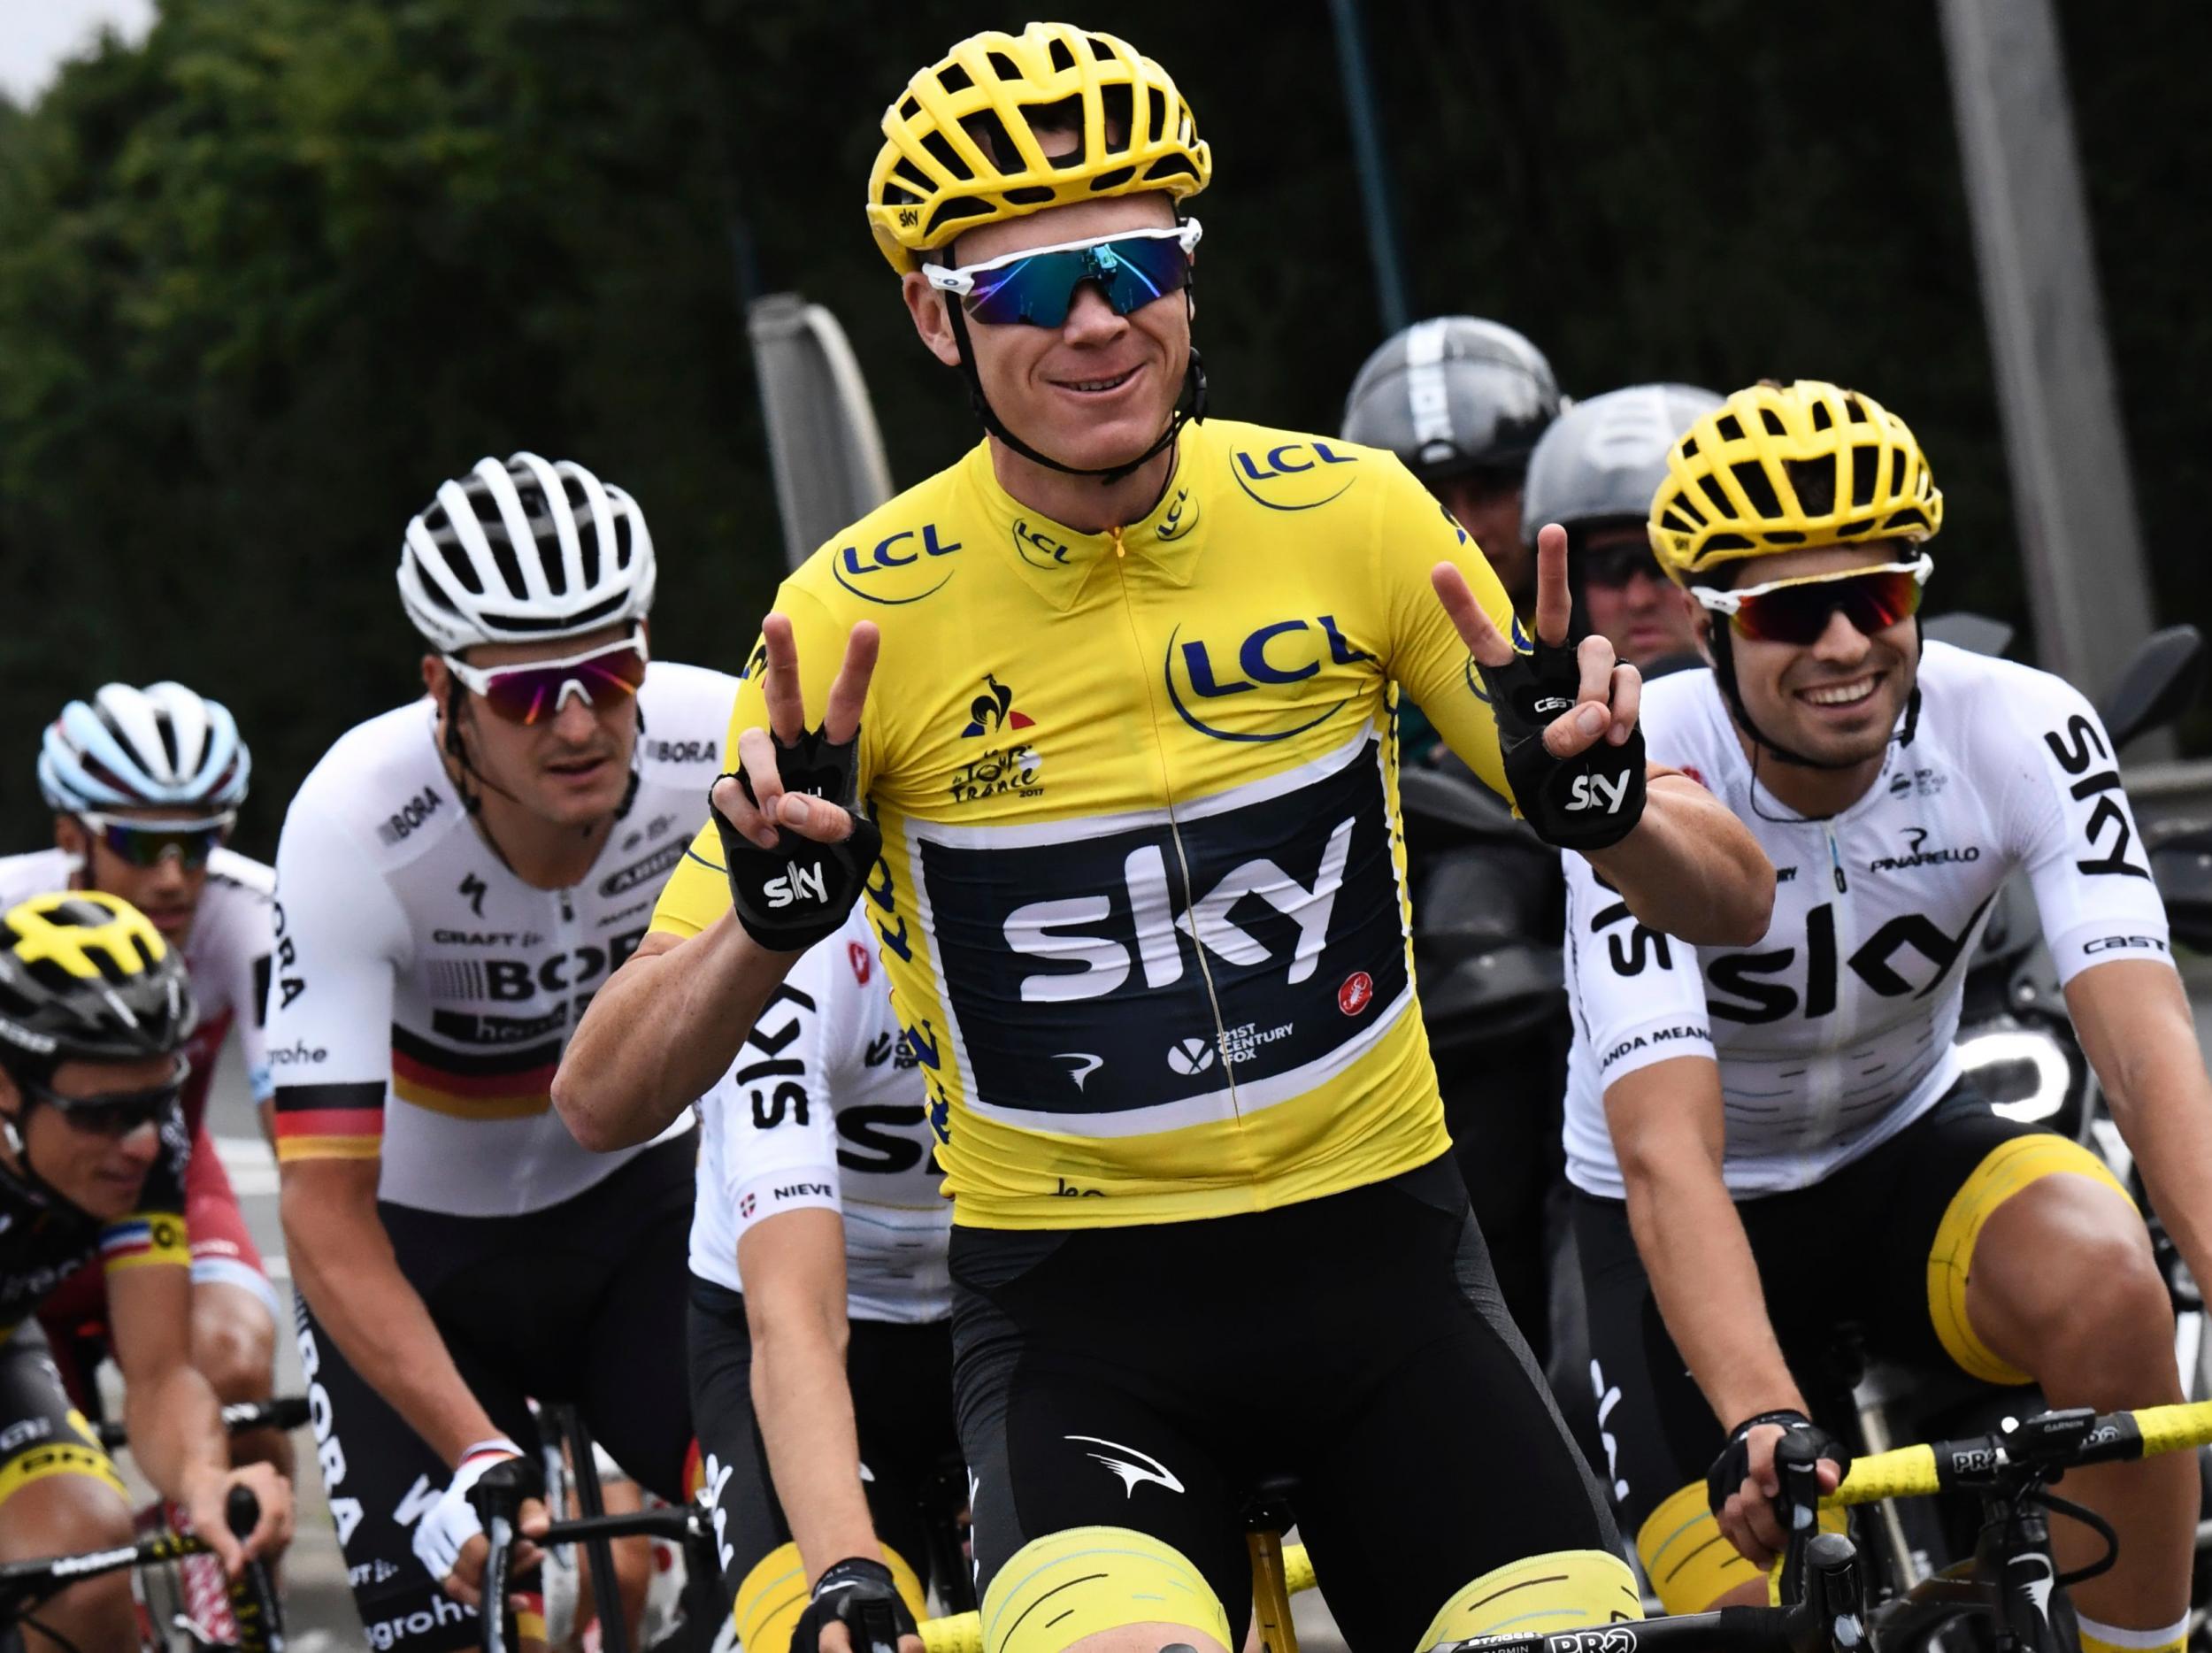 Froome has won his fourth title